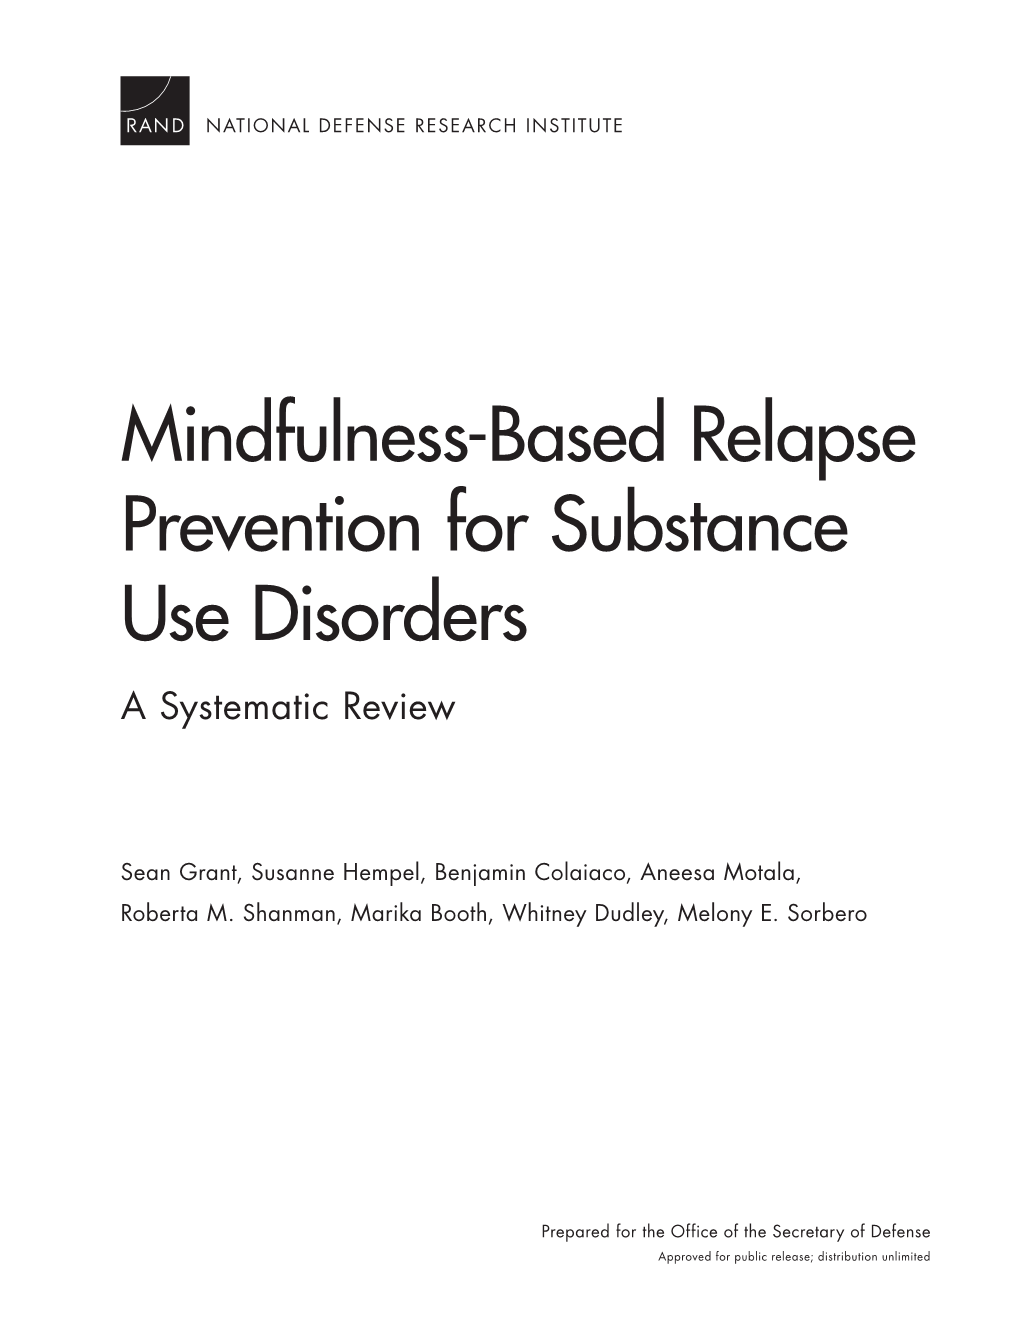 Mindfulness-Based Relapse Prevention for Substance Use Disorders a Systematic Review